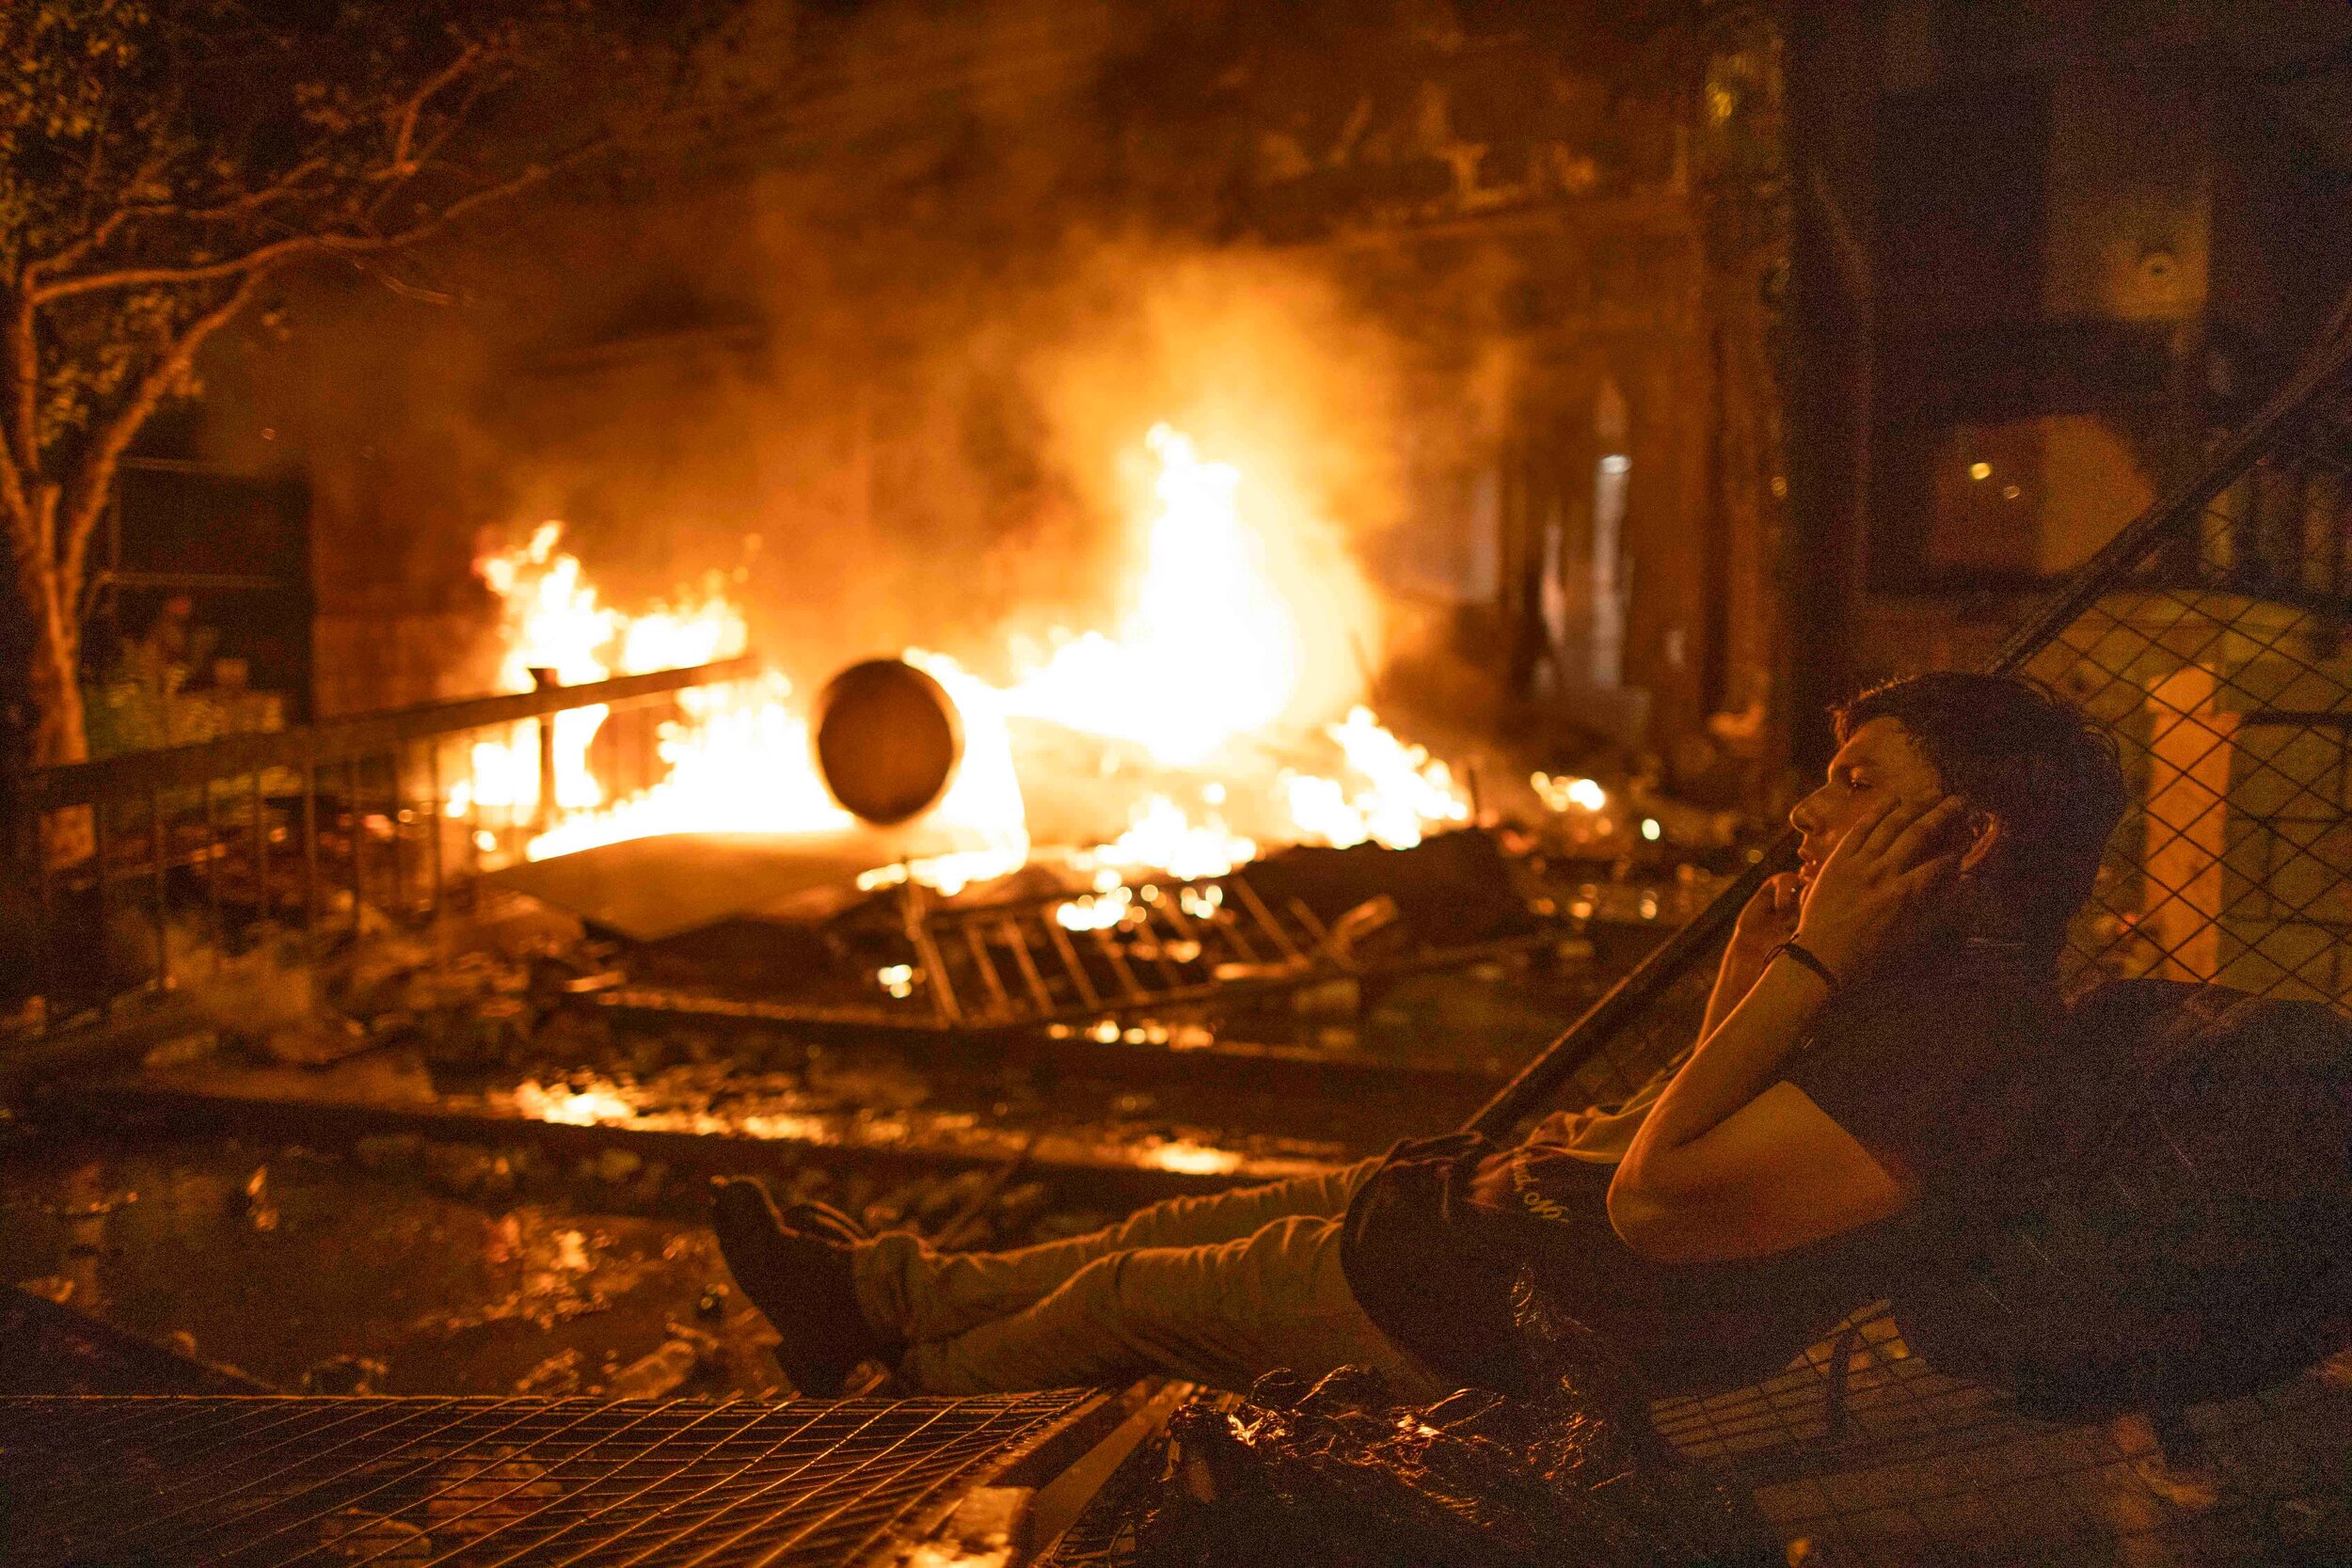  A protester sits on a fence in front of a fire started at the Minneapolis 3rd police precinct during a riot over the killing of George Floyd on May 28, 2020. 